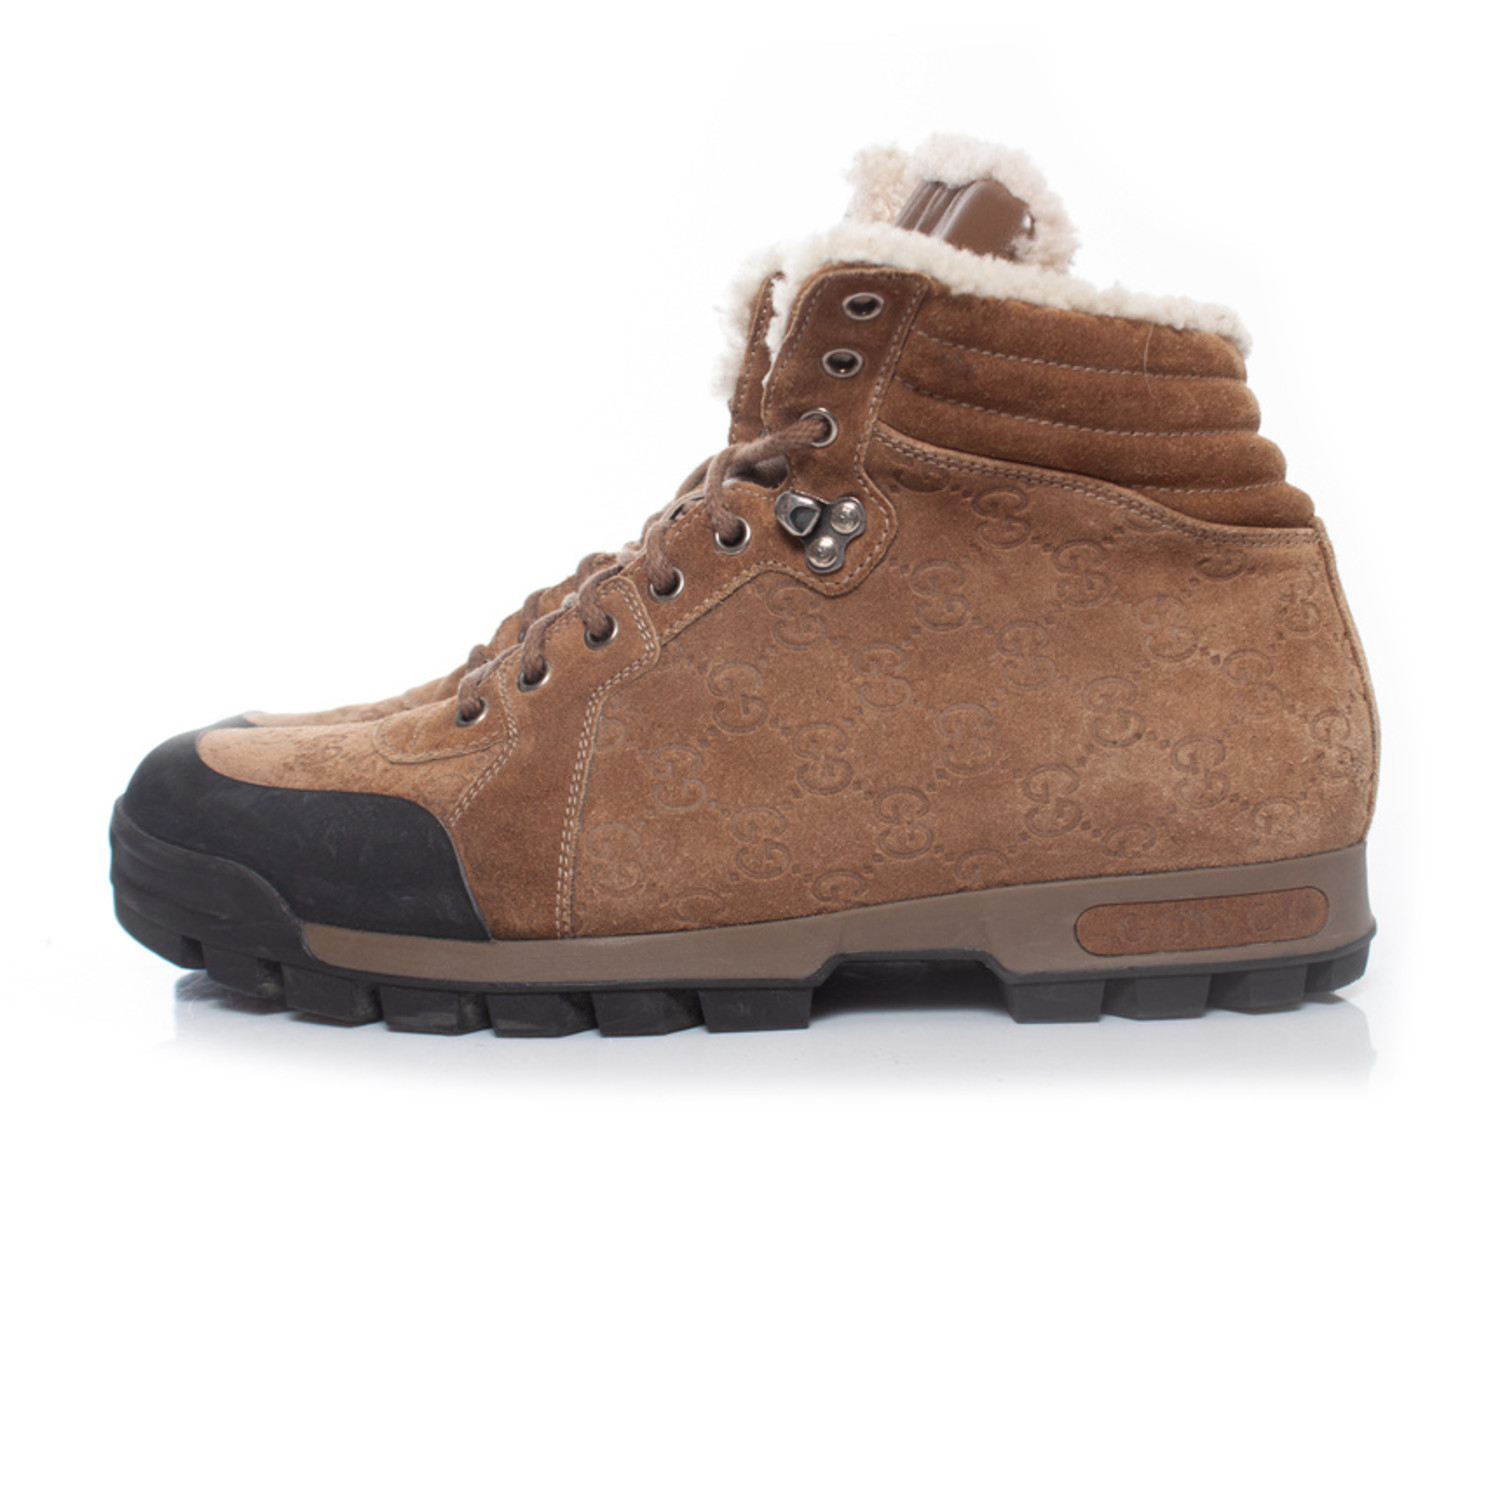 Men's GG lace-up boot